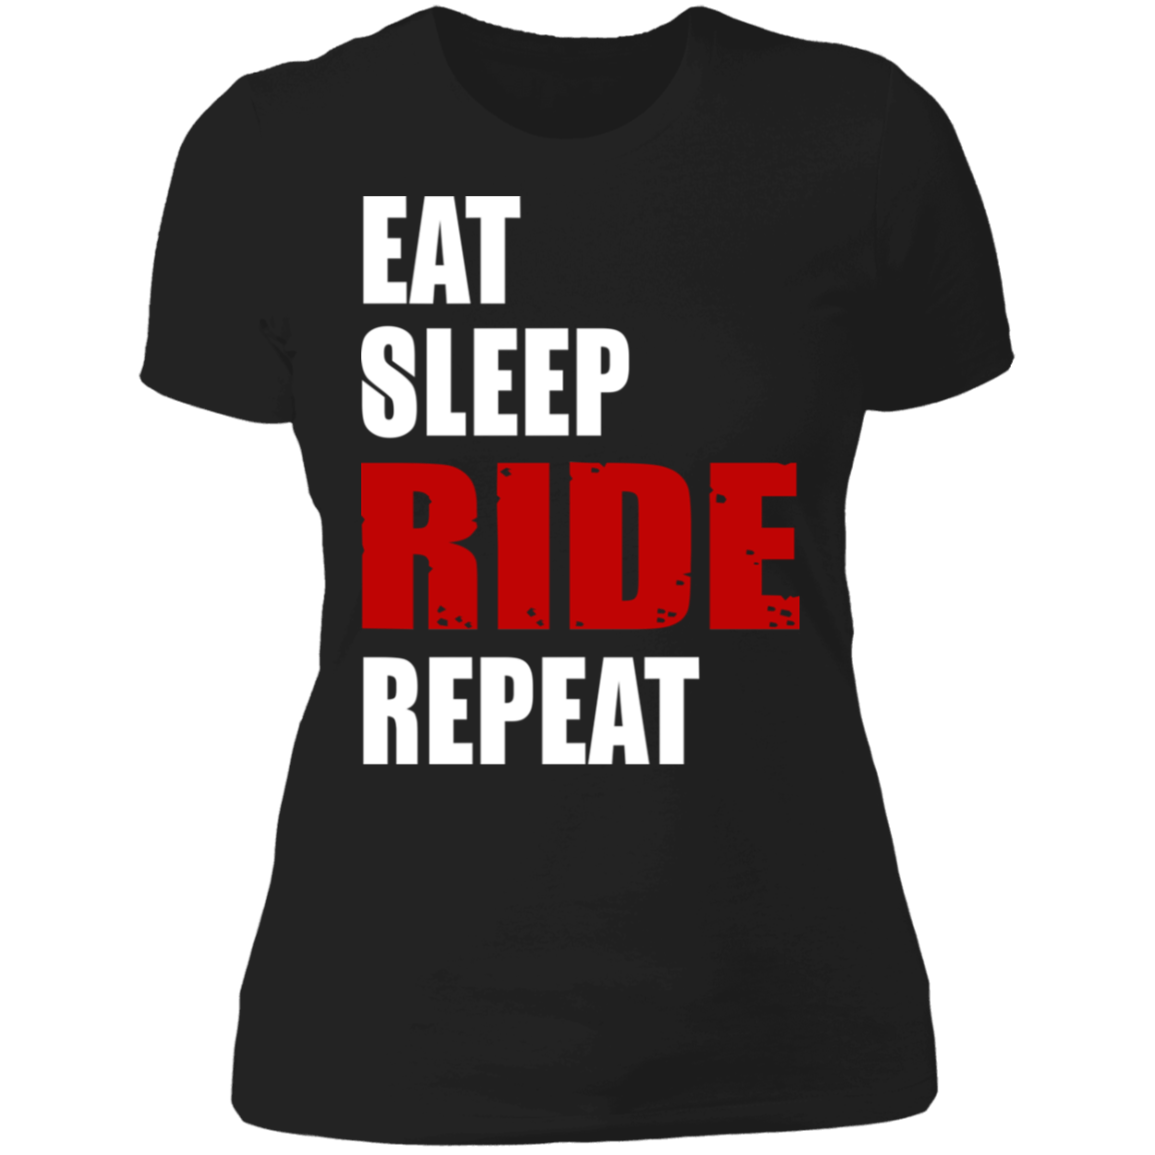 Eat sleep ride repeat t-shirt design for motorcycle lovers 6749127